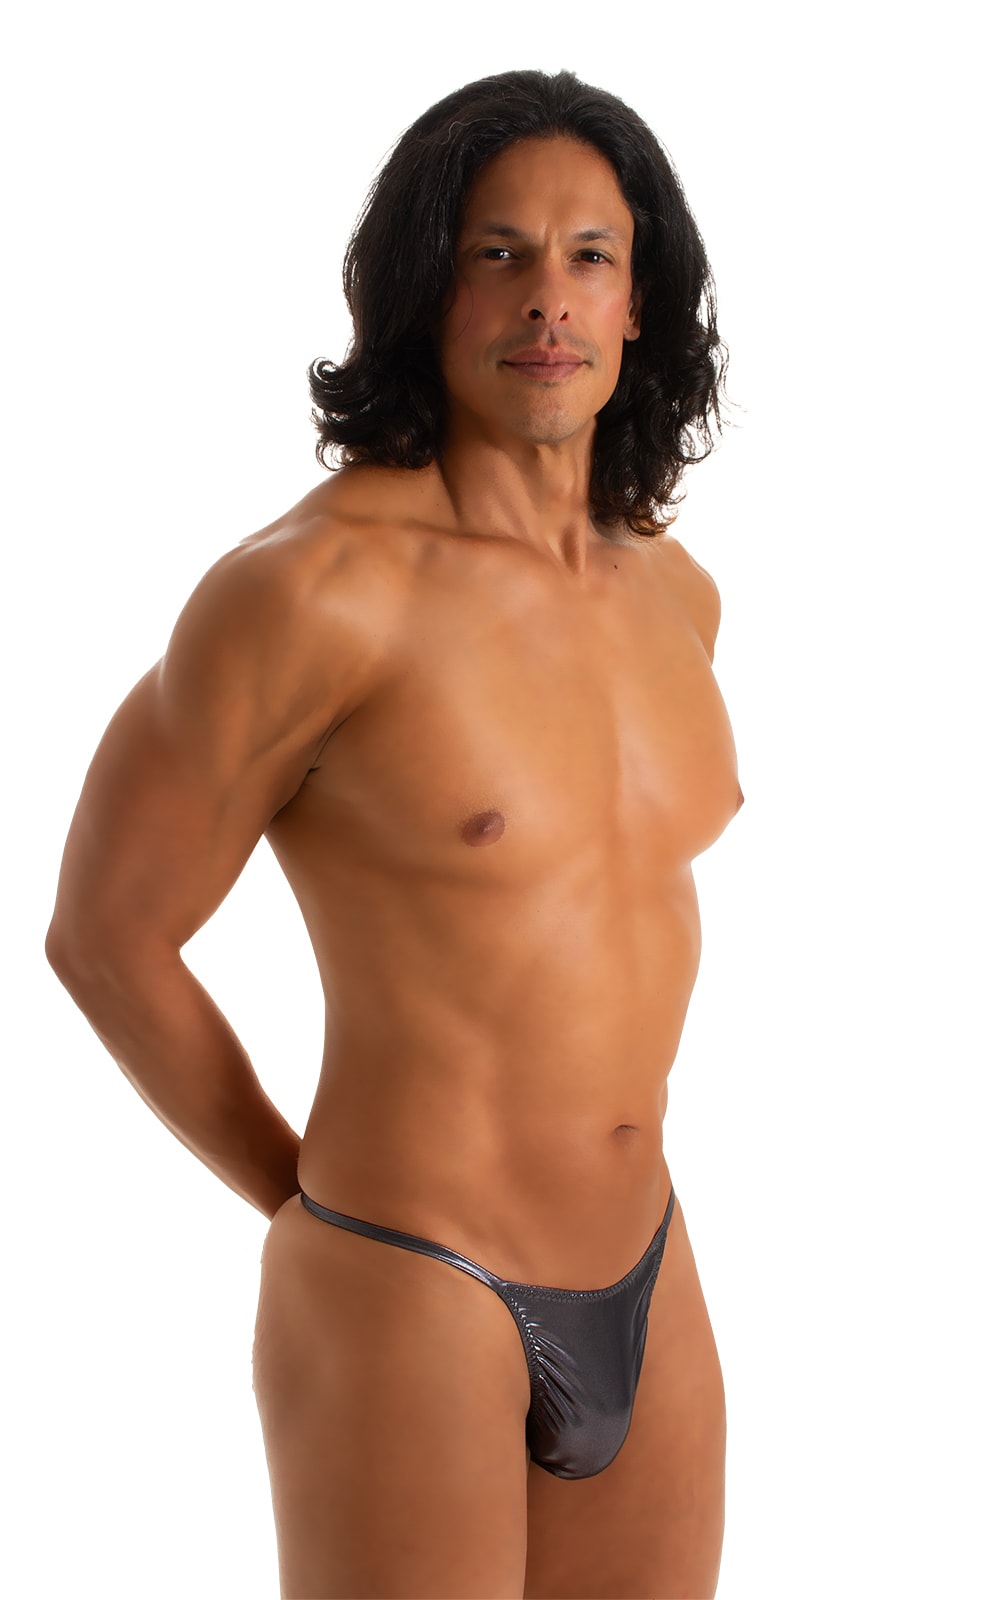 Men's Smooth Front, G-String thong - shown in Black Spandex with